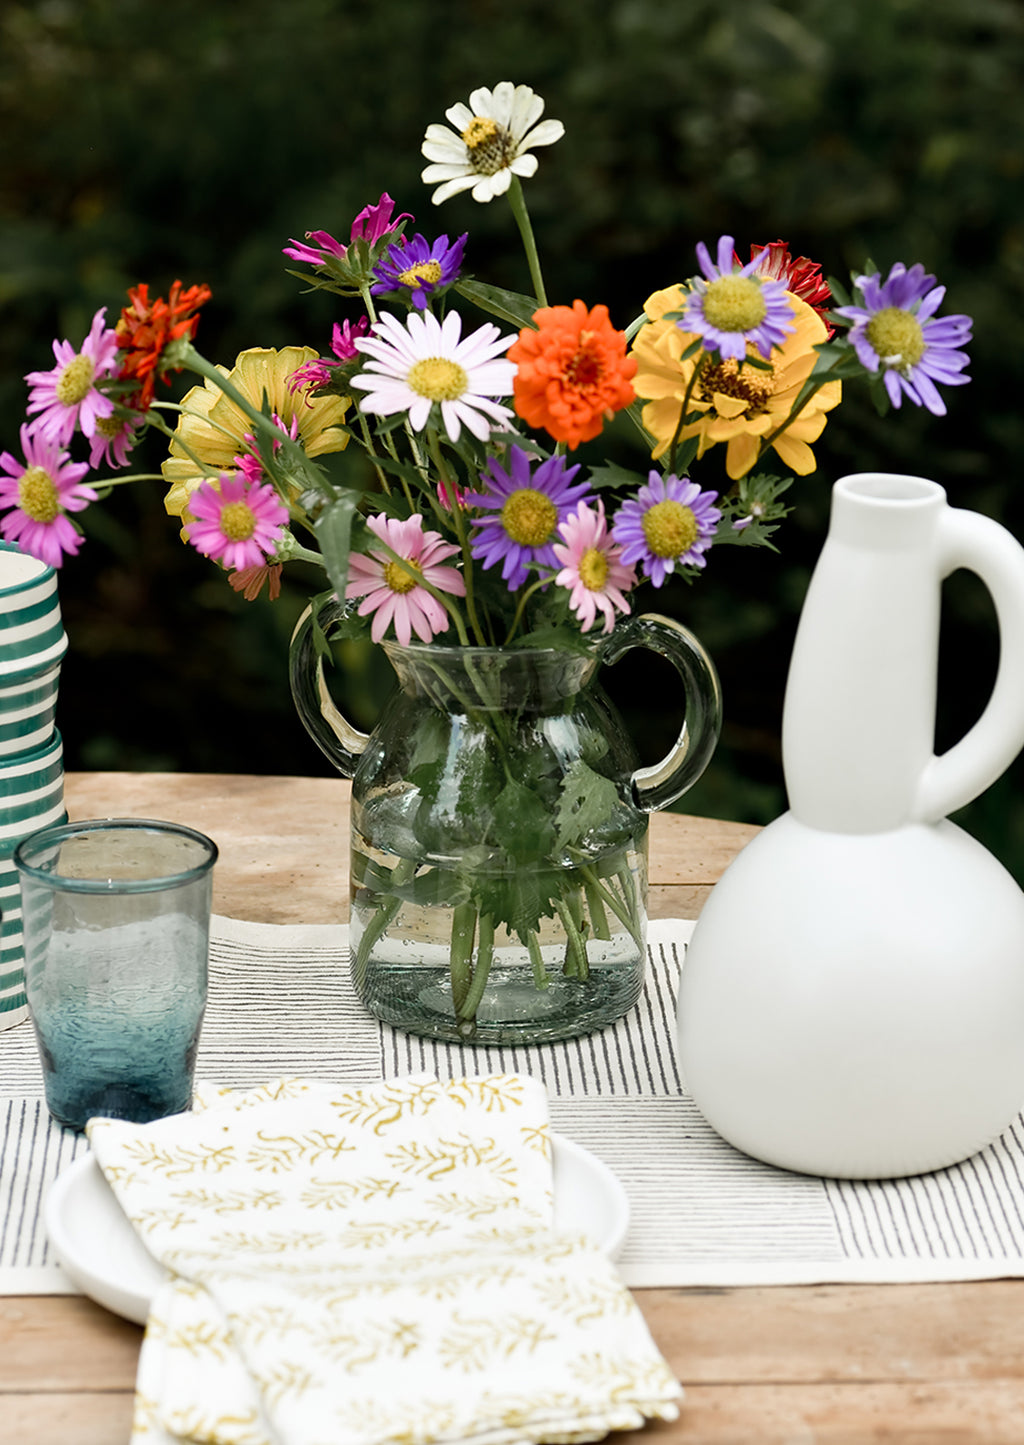 3: A clear, jug-shaped glass vase on a set table with flowers.